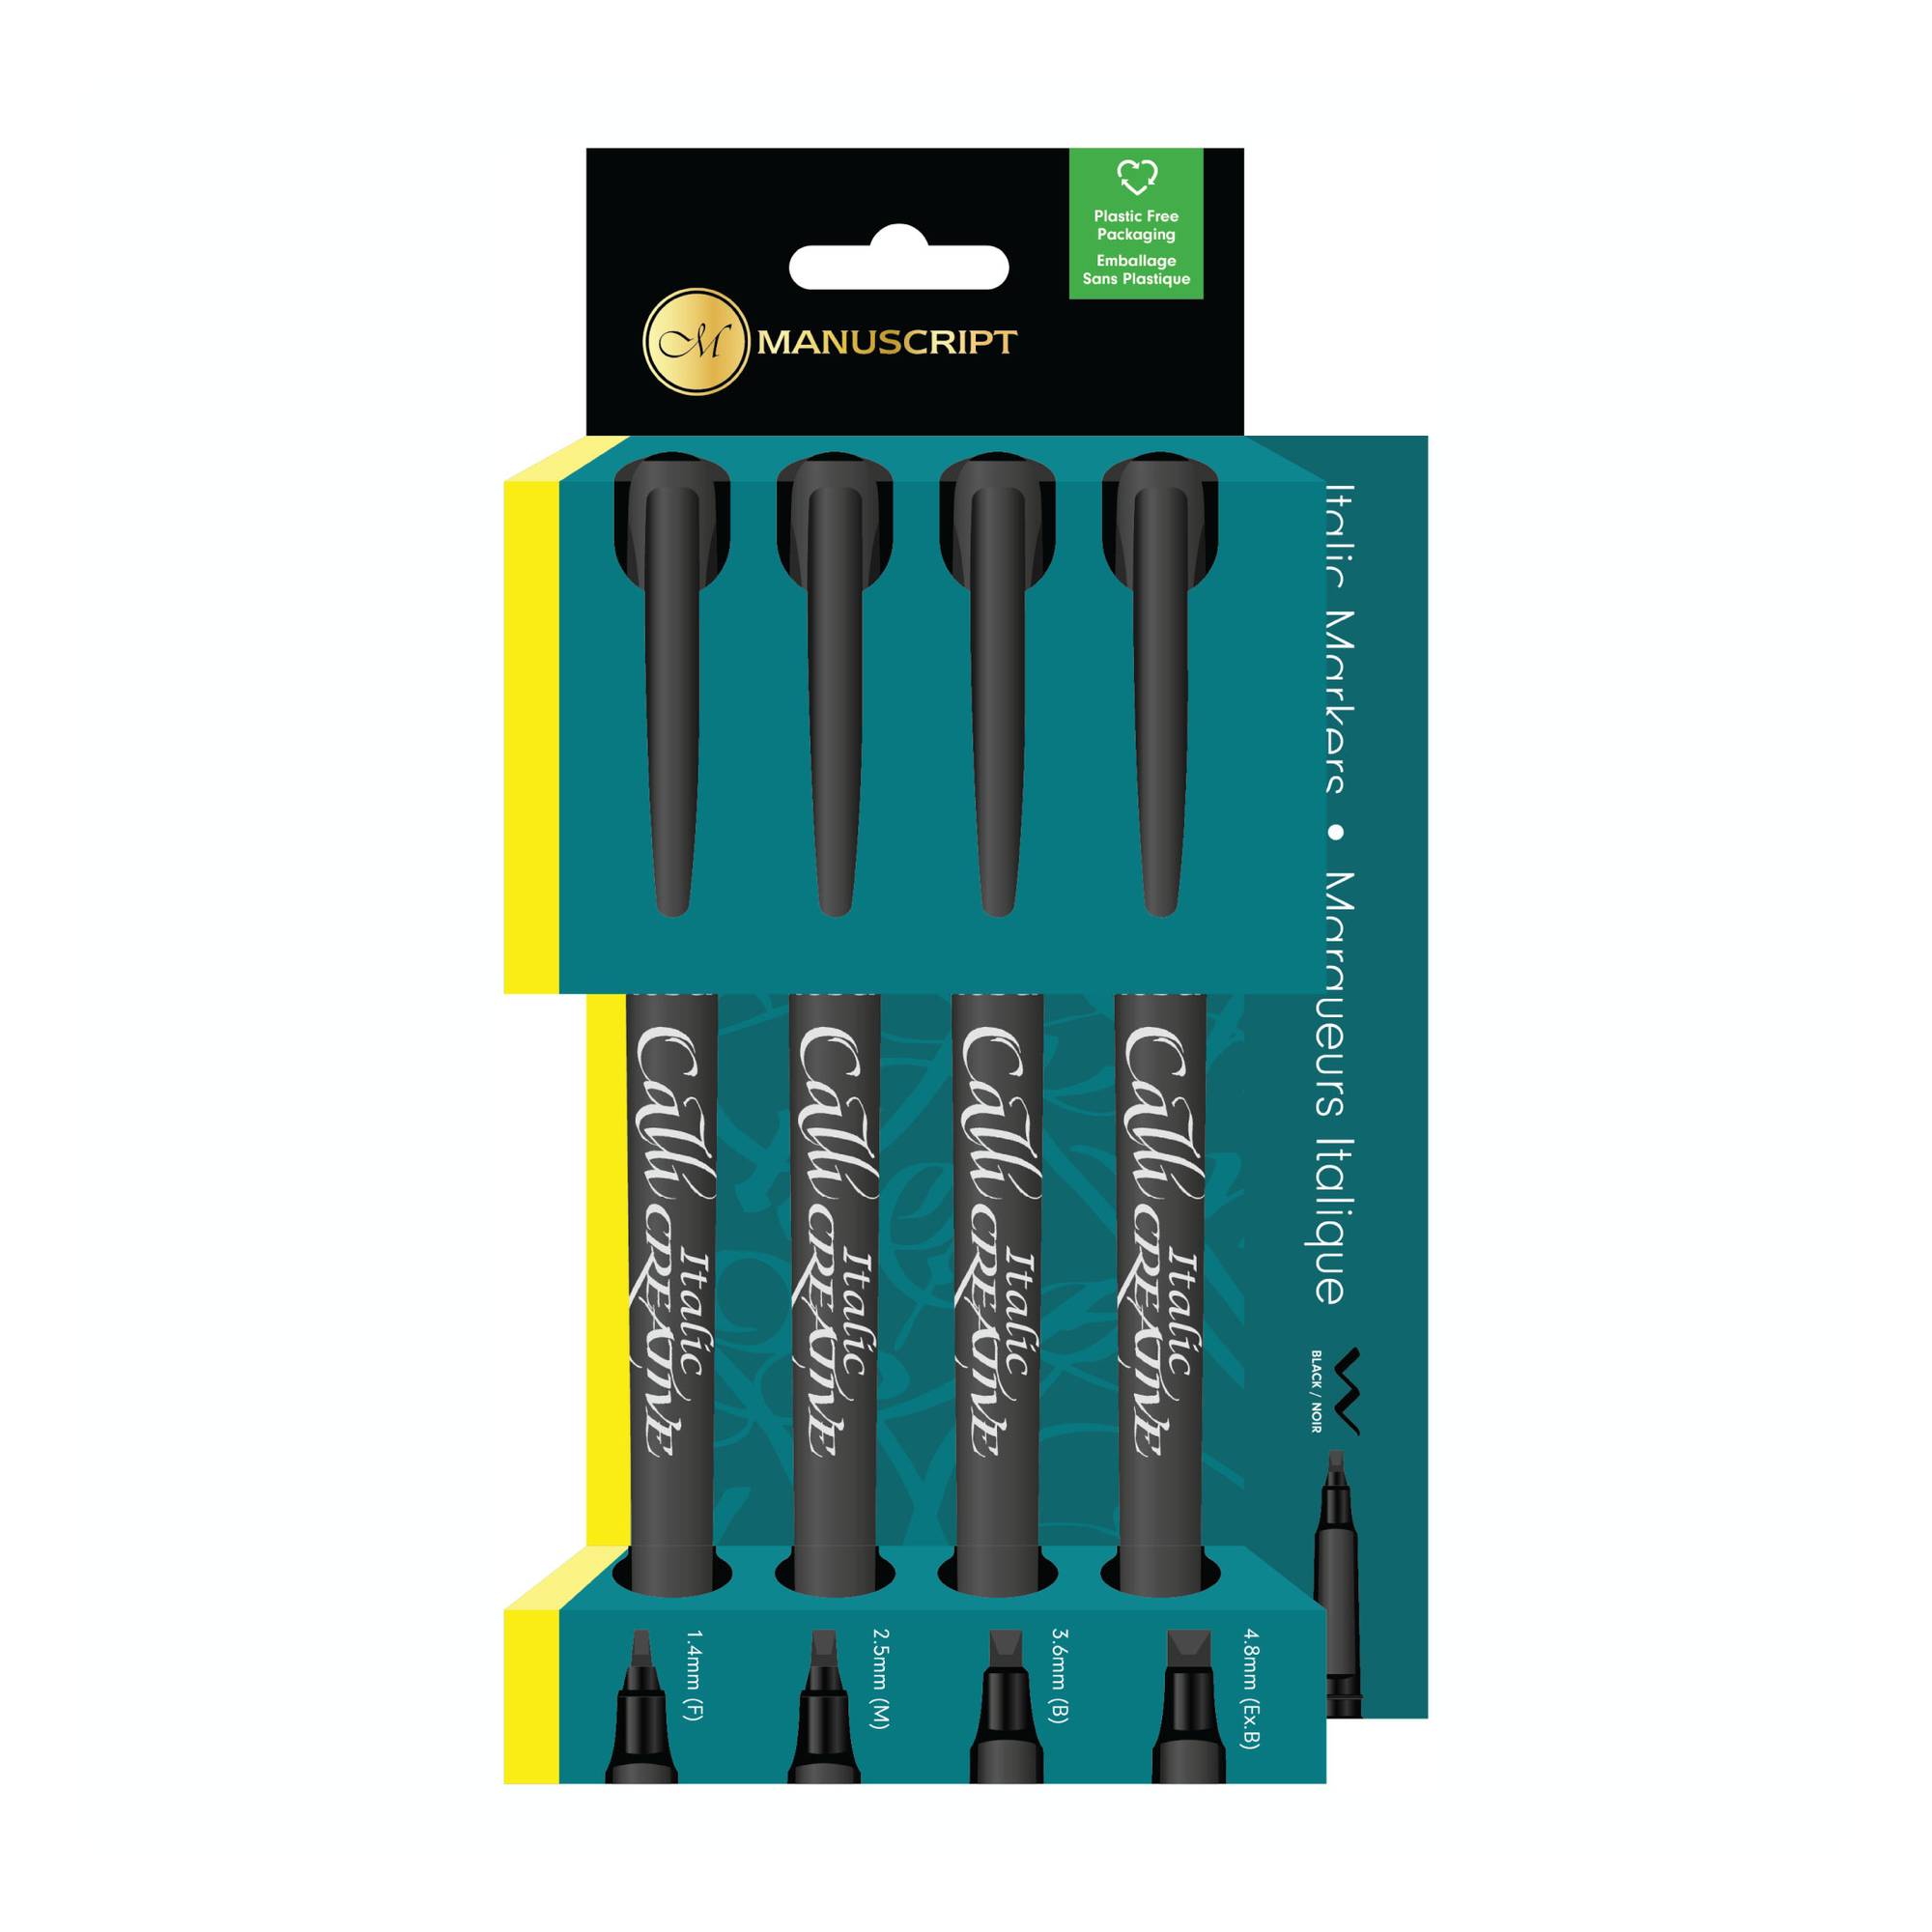 Black Permanent Markers 4 Pack